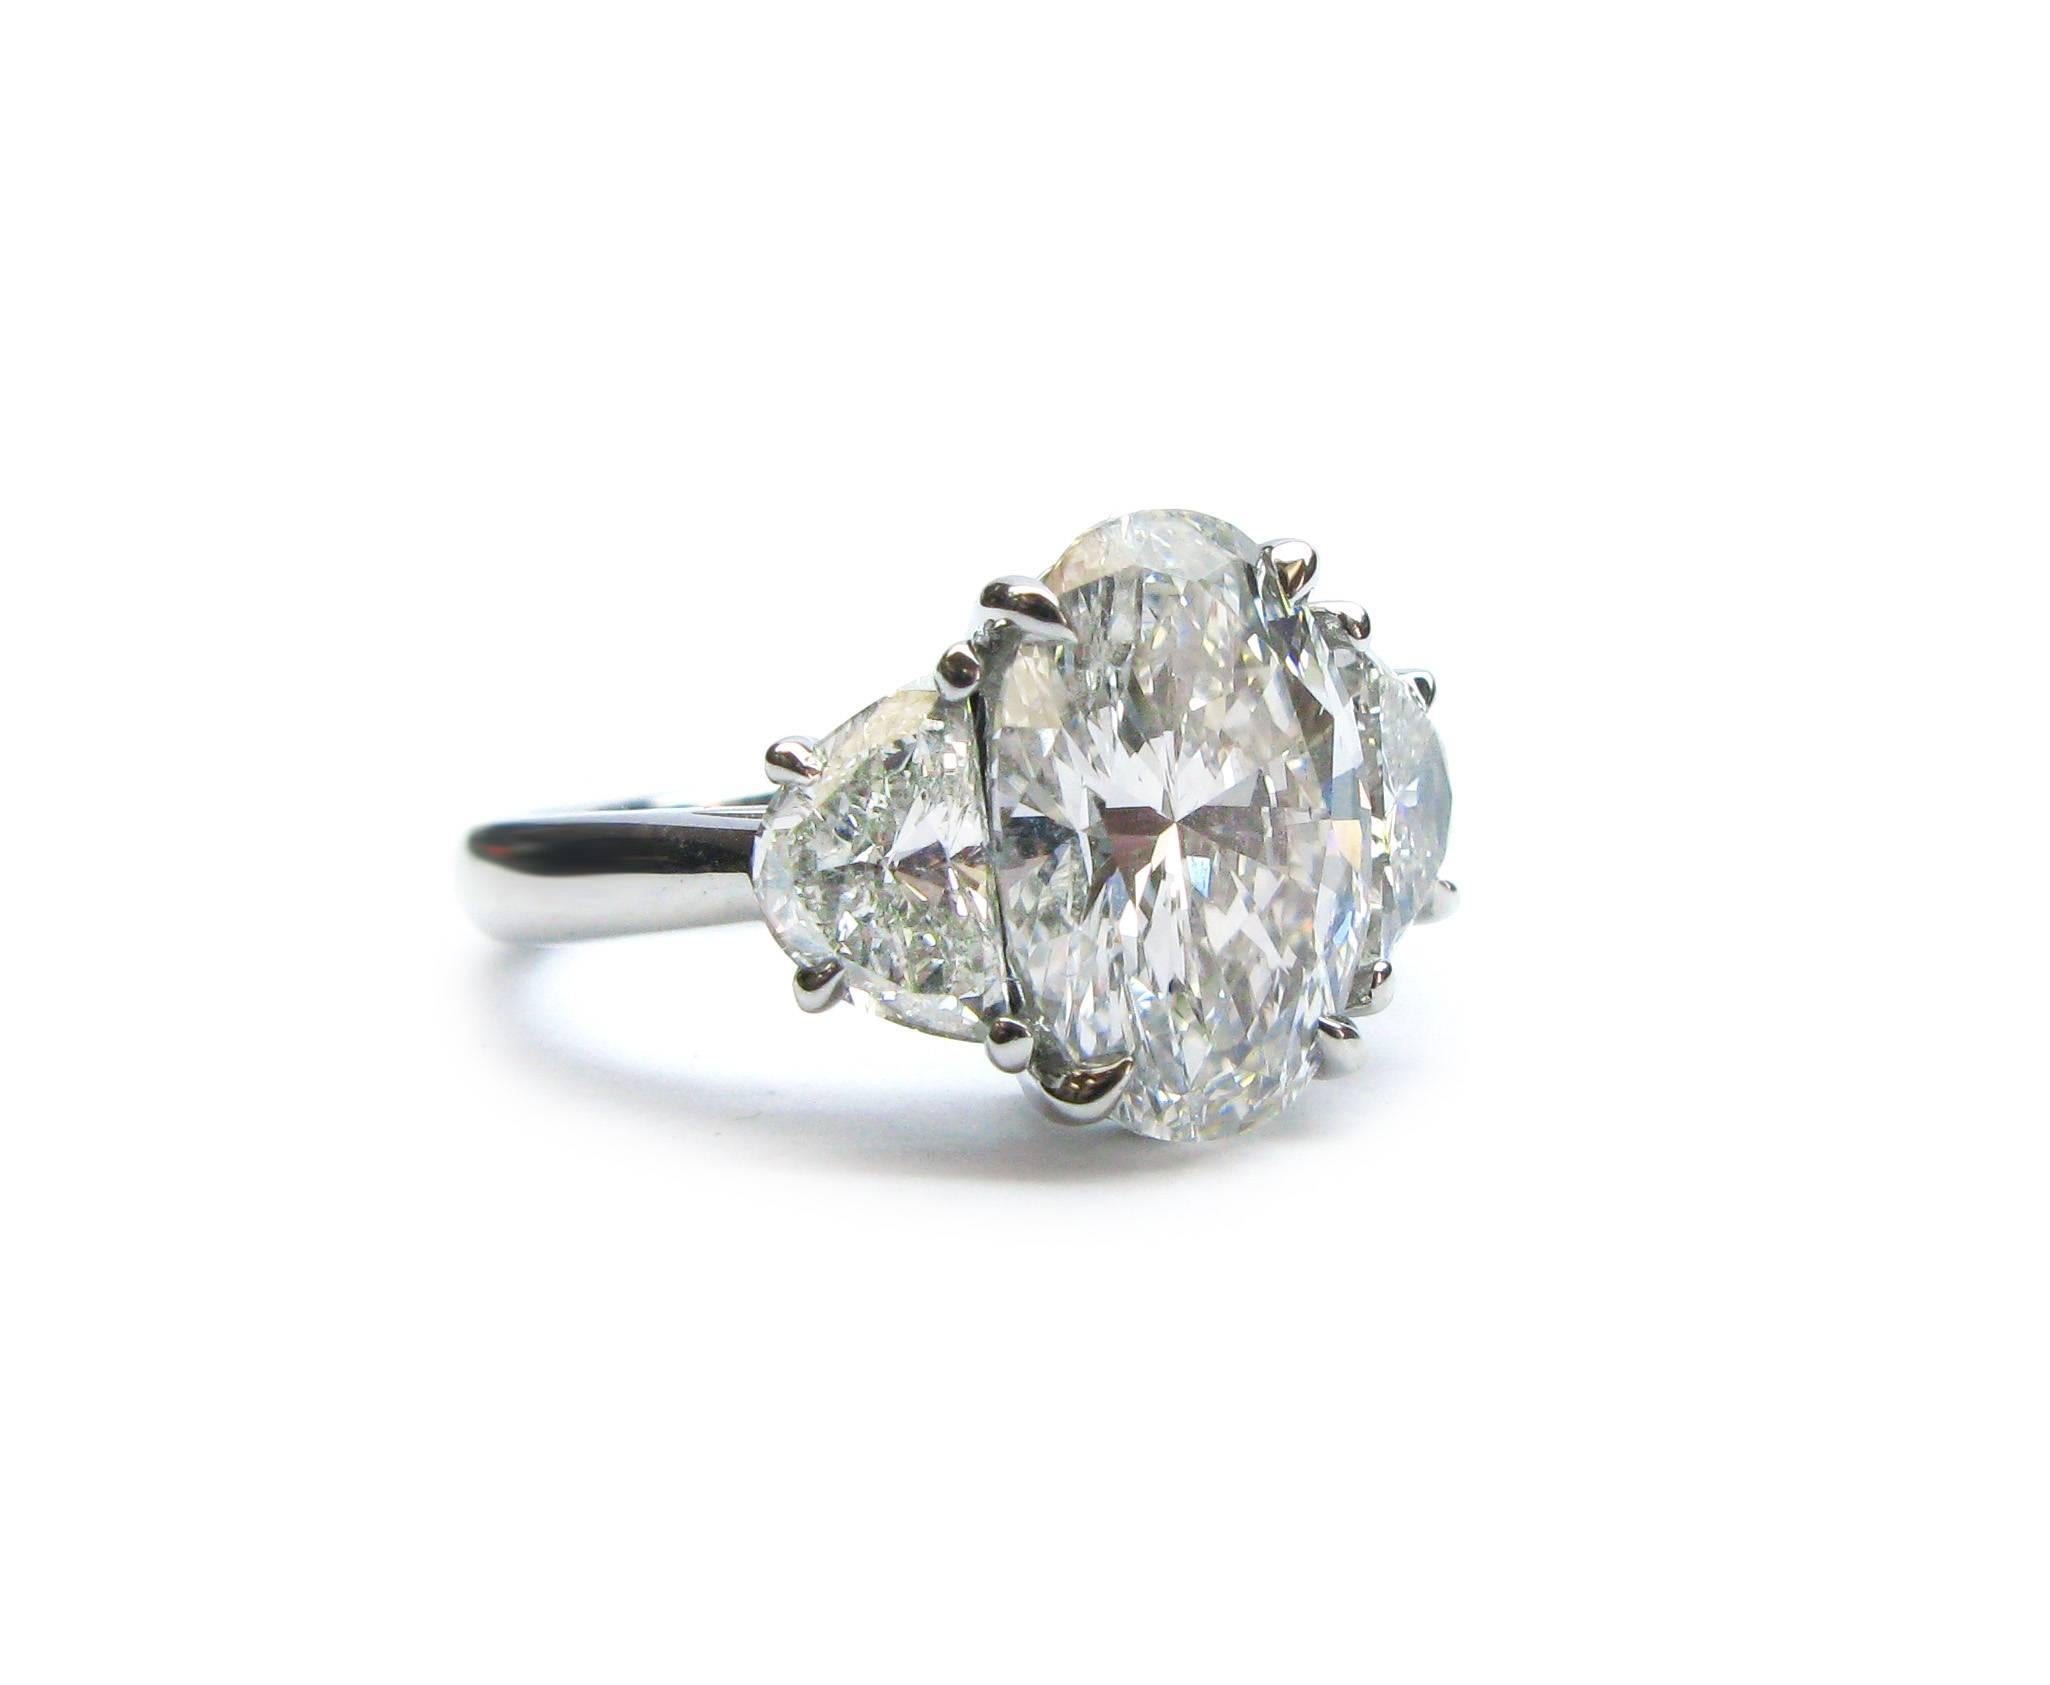 This beautiful handmade platinum ring features a GIA certified 3.04ct, G color, VVS2 clarity, Oval cut diamond with 1.12ctw halfmoon diamond sidestones. This sparkling stunner belongs on your lovely finger!